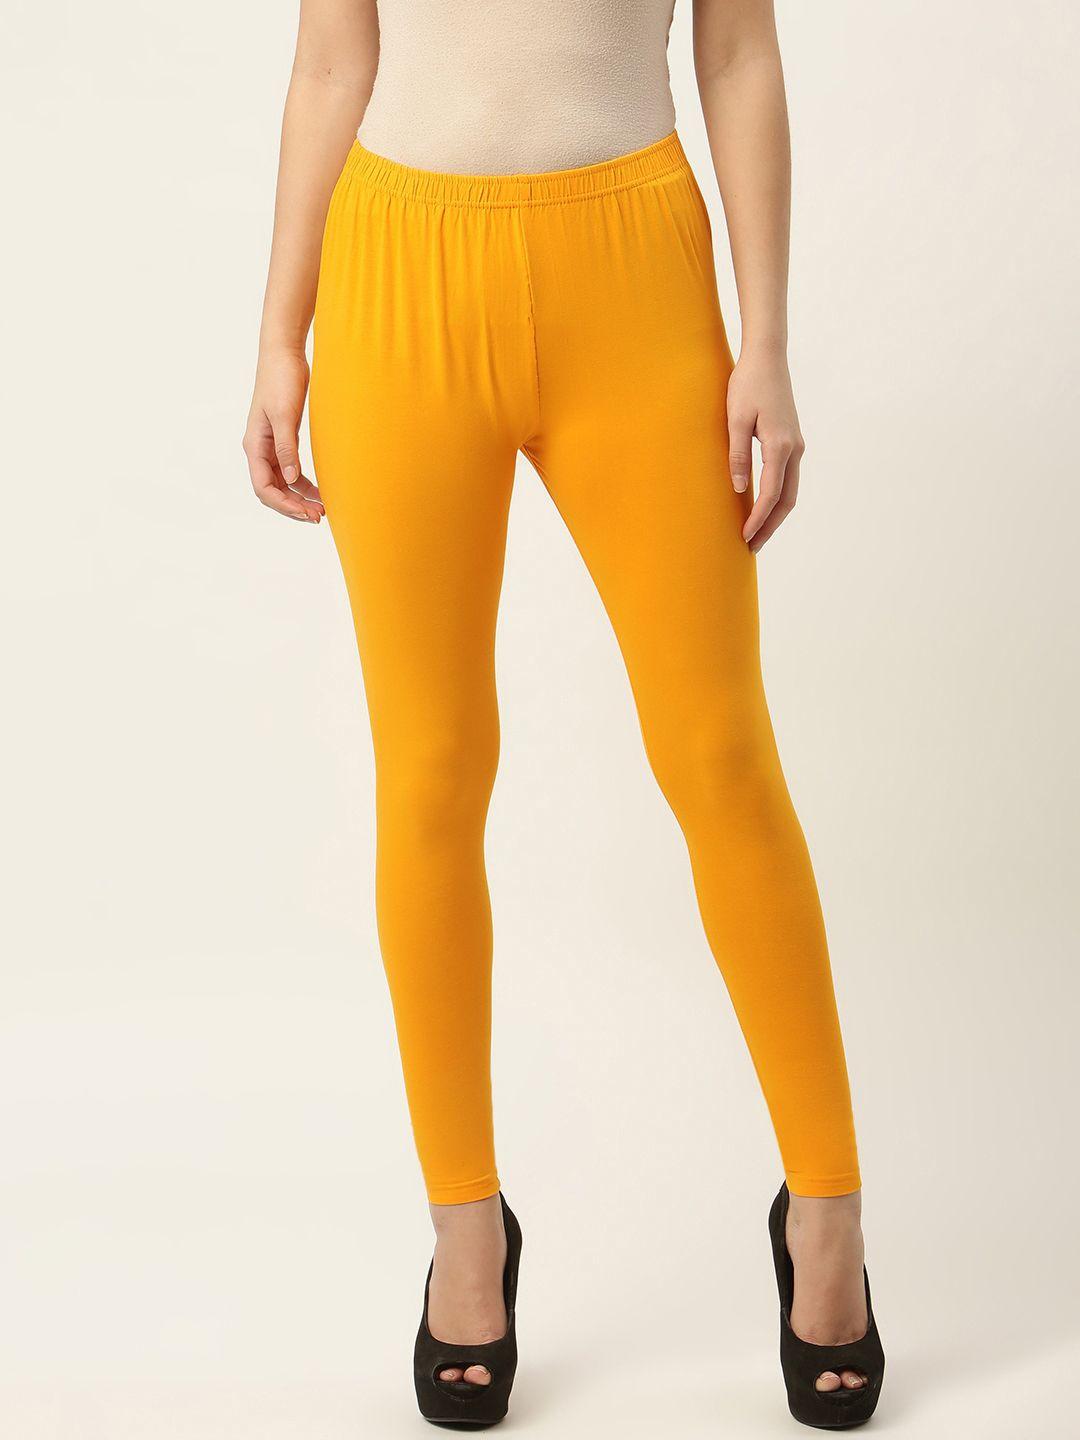 ms.lingies women yellow solid ankle-length leggings